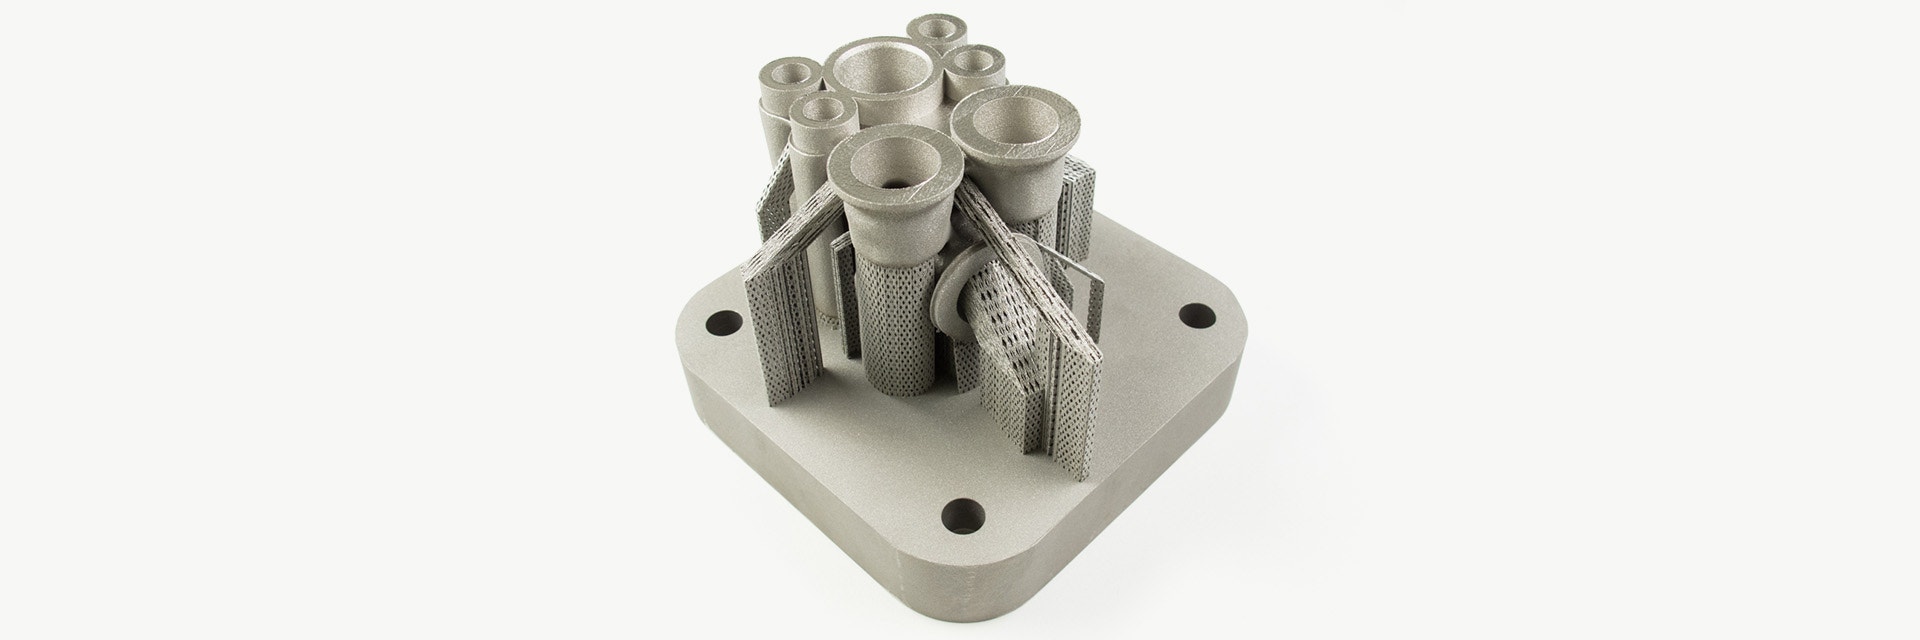 Metal 3D-printed part with support structures